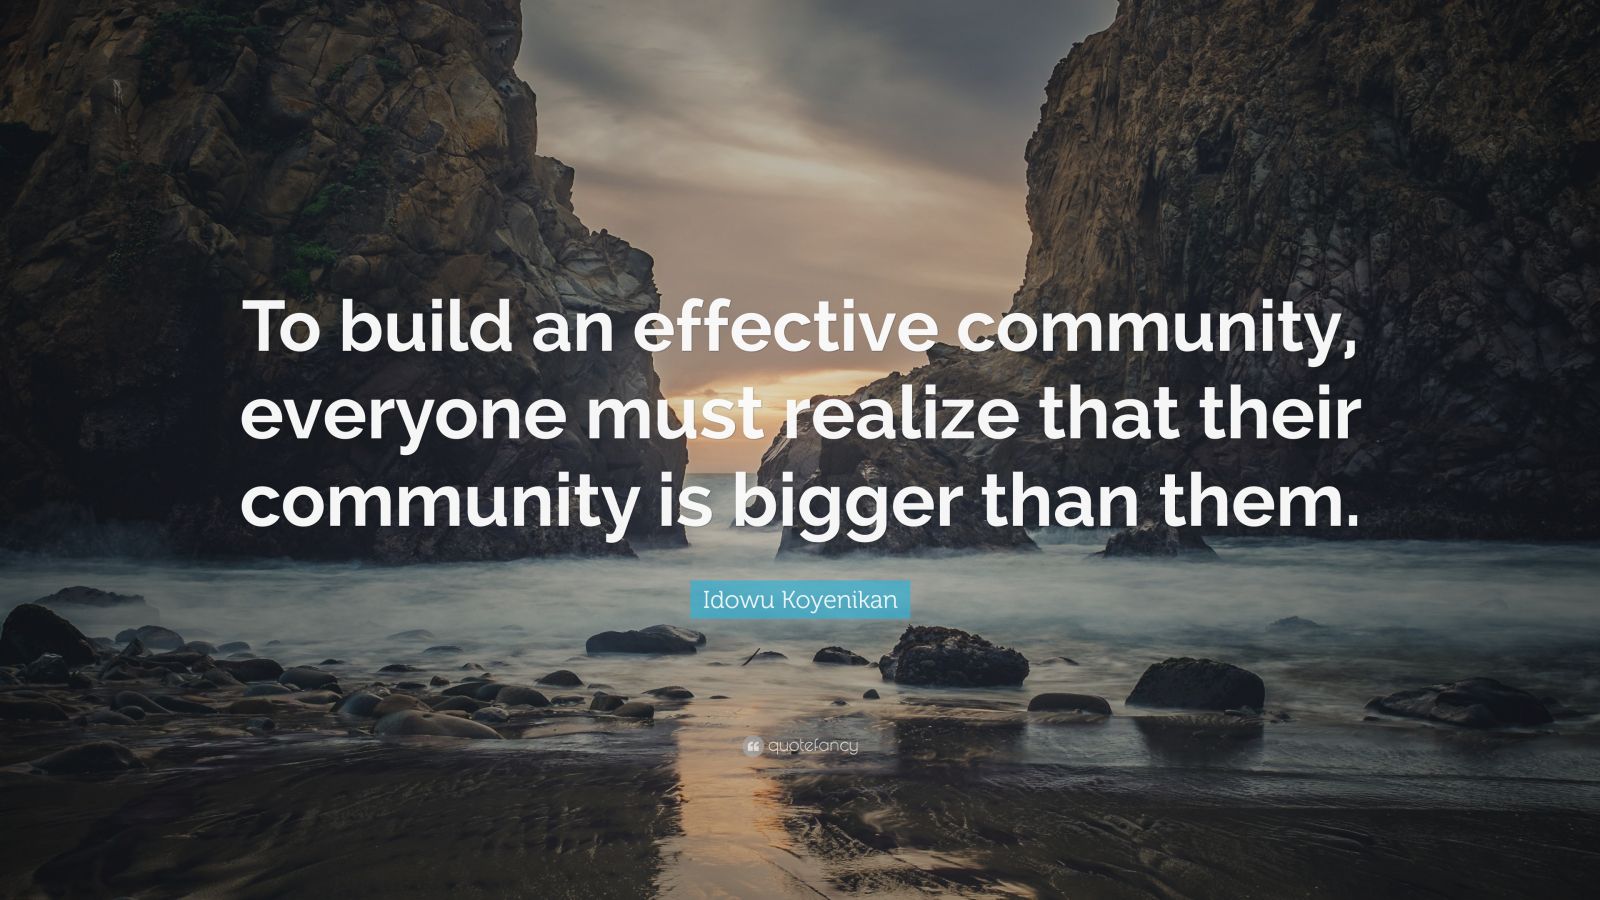 essay about it's i who build community